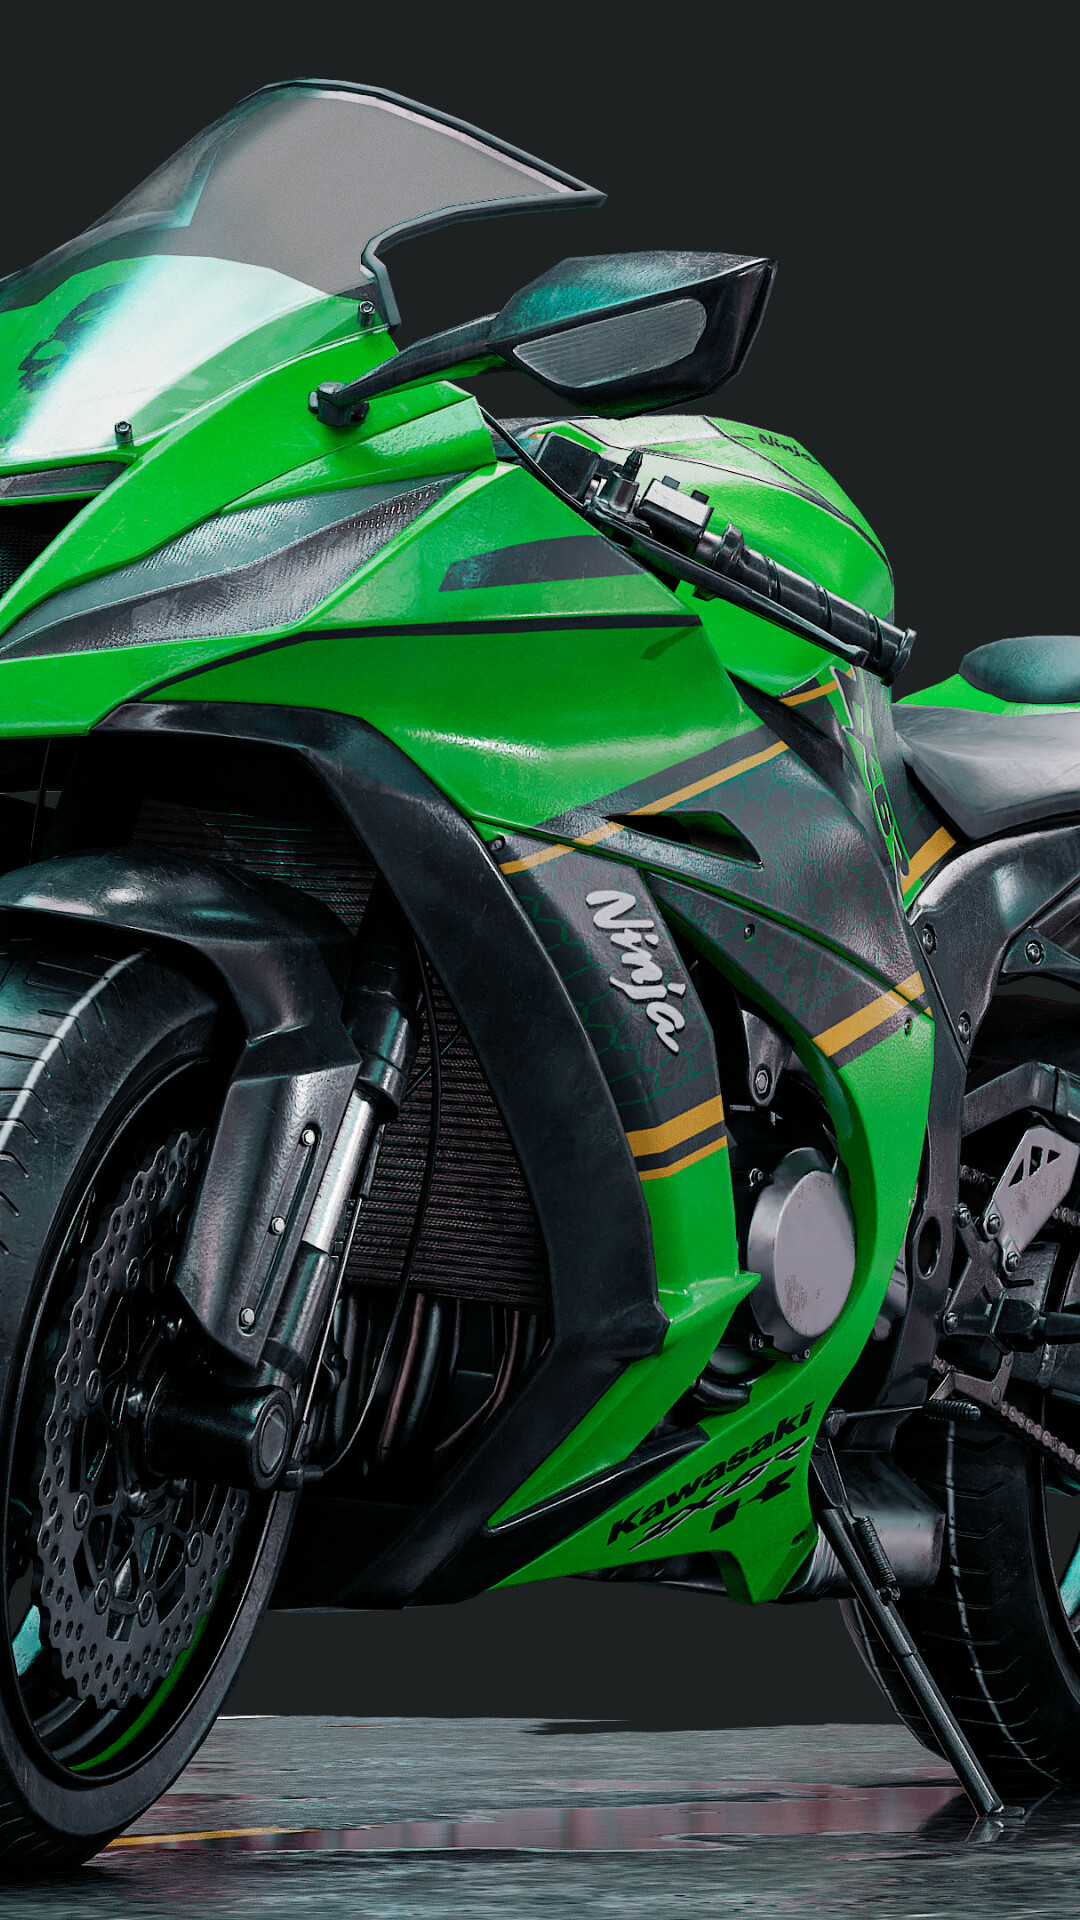 Kawasaki Ninja ZX: ZX10R, Originally released in 2004 and has been updated and revised throughout the years. 1080x1920 Full HD Background.